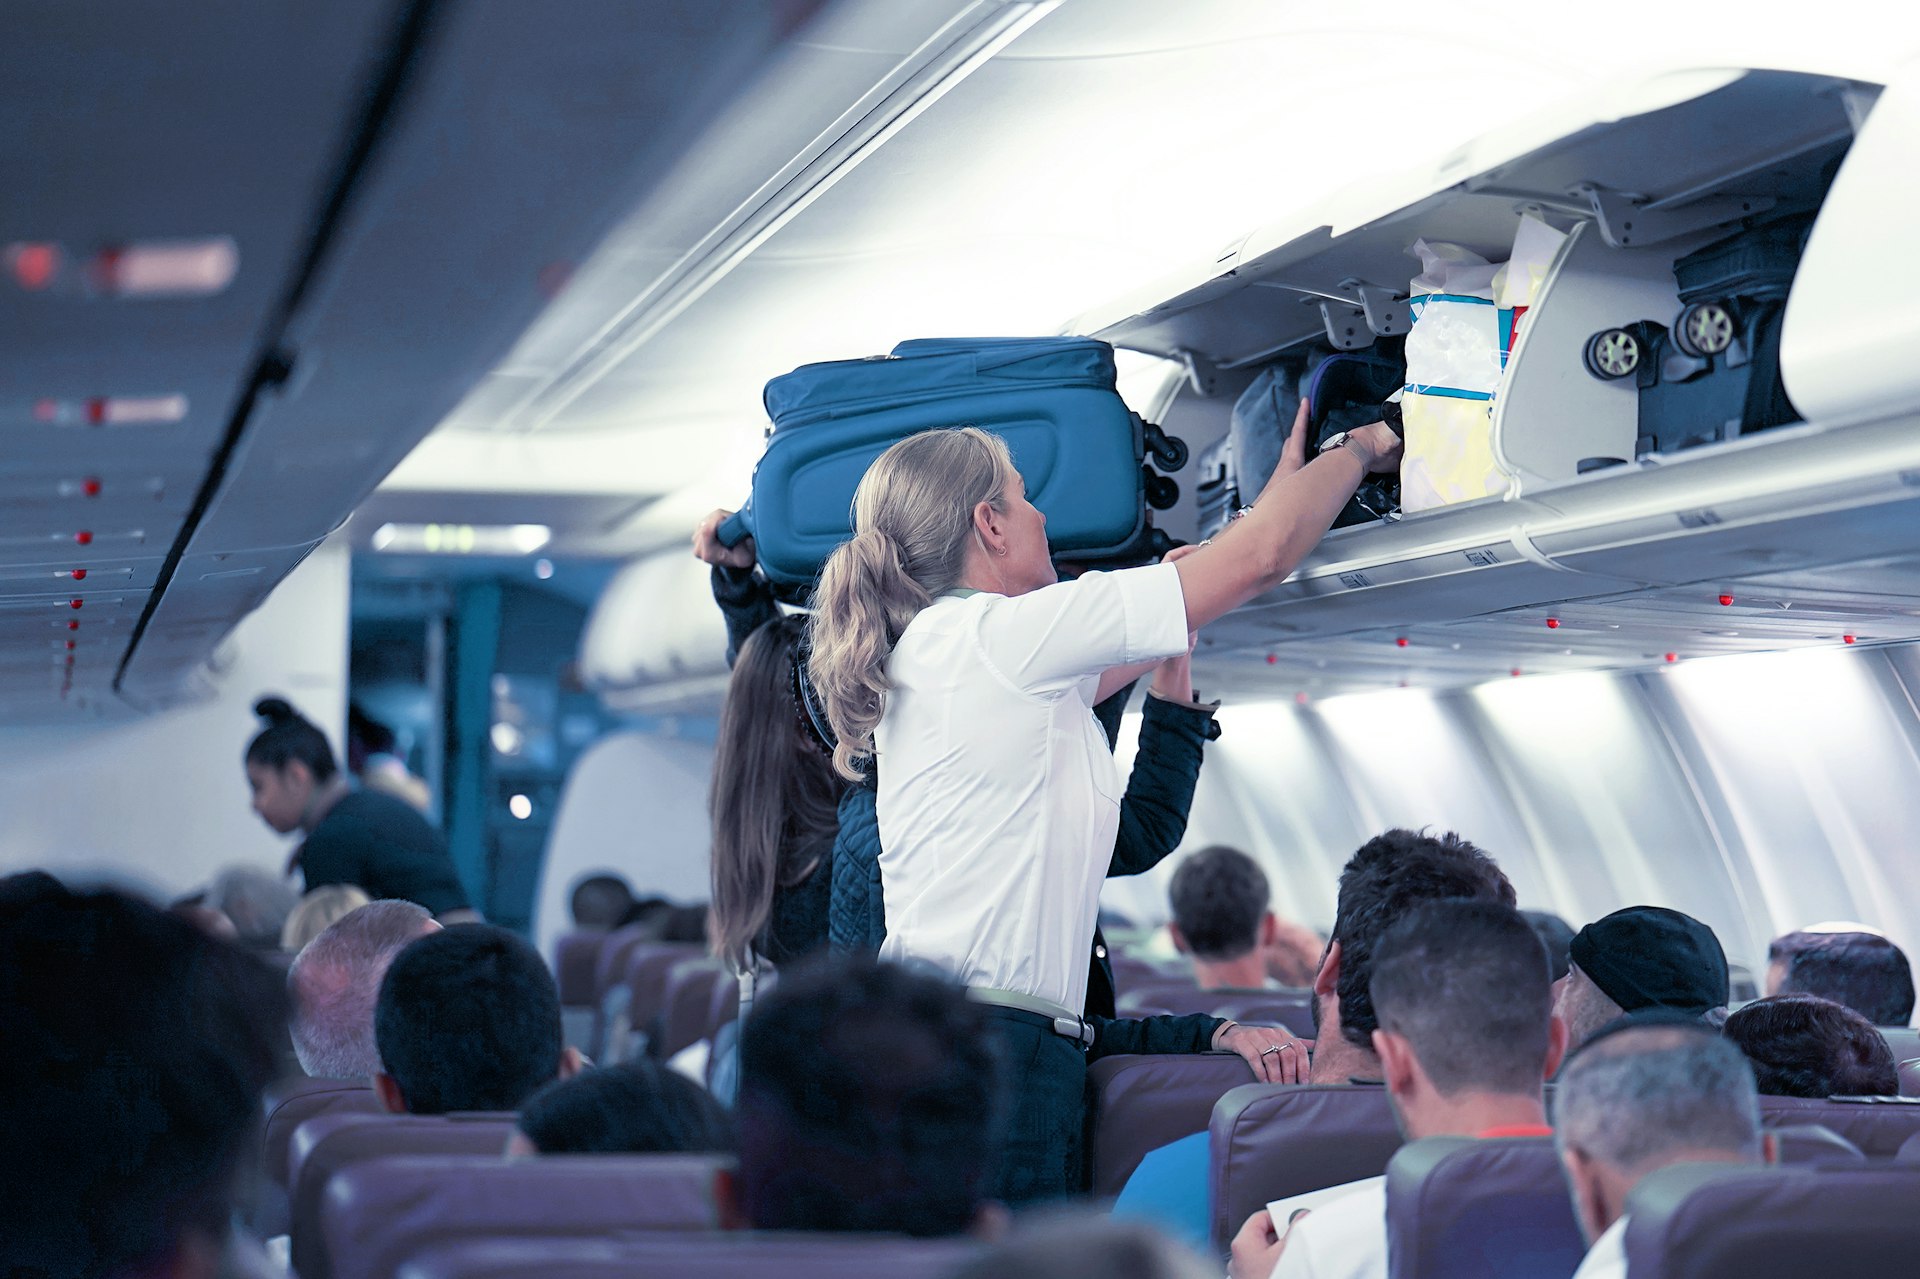 A flight attendant helps passengers load baggage in the overhead compartments of an airplane